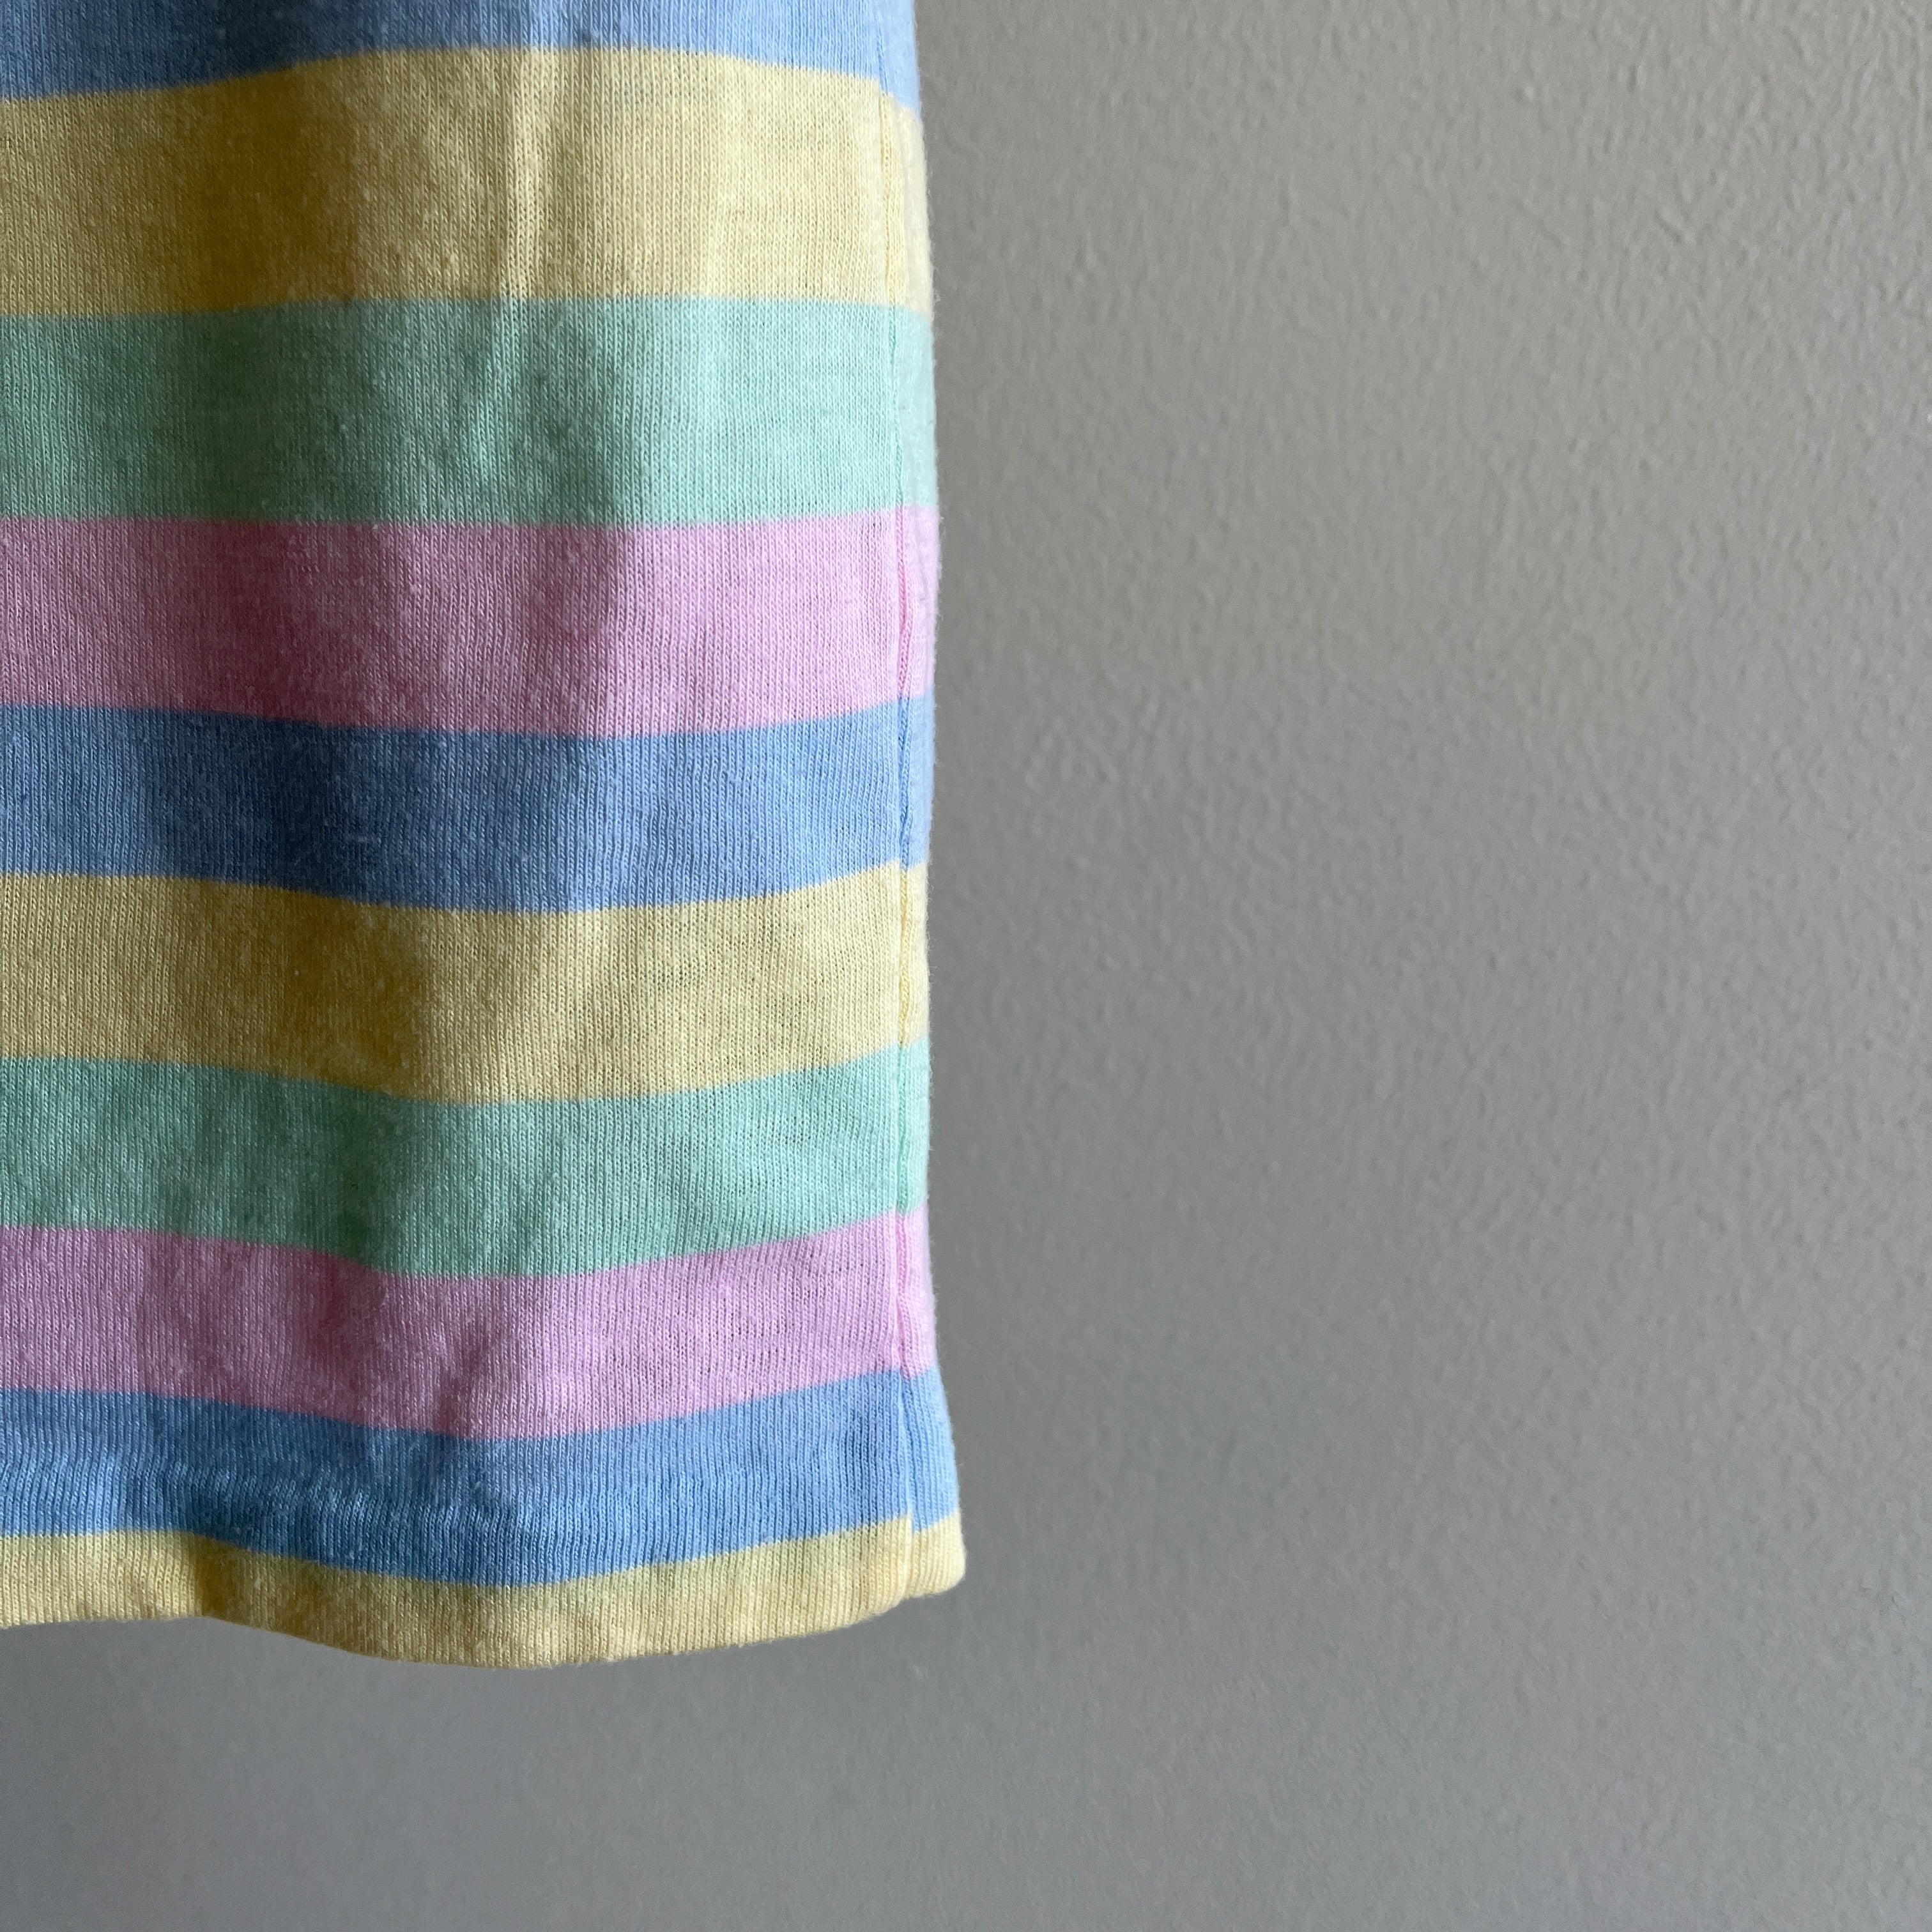 1970s Dee Cee Brand Pastel Striped Polo T-Shirt - WOW!